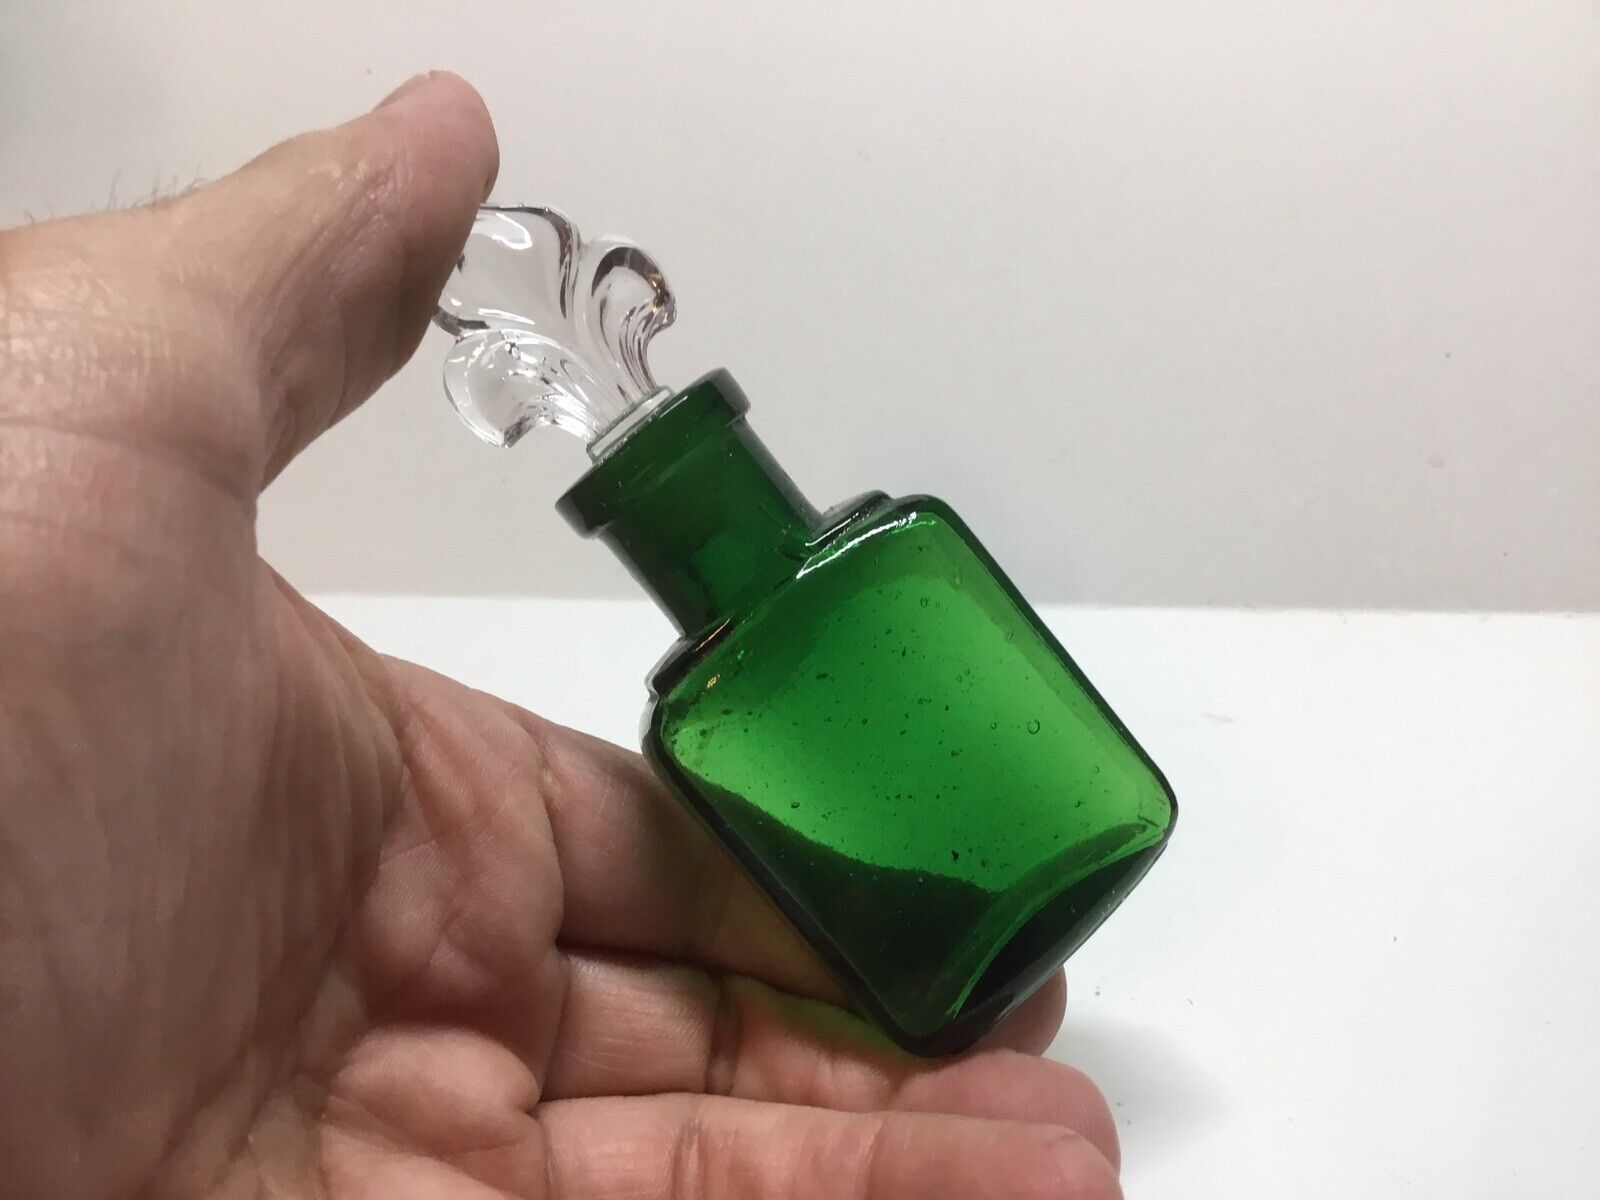 Small Antique Rich Emerald Green Perfume / Scent Bottle With Stopper.